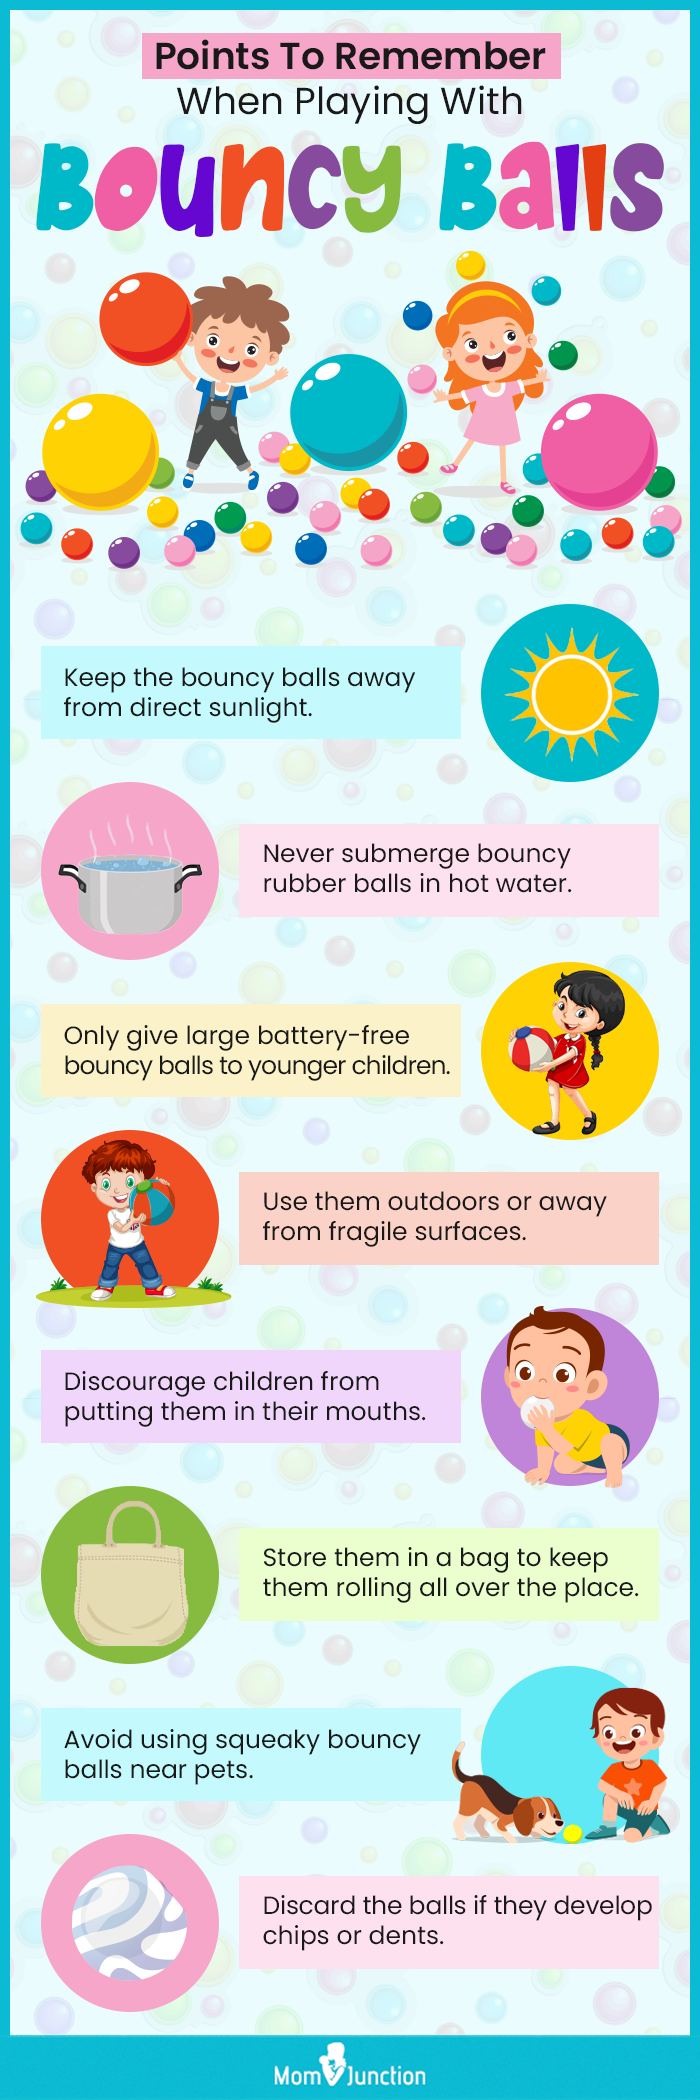 Points To Remember When Playing With Bouncy Balls (infographic)